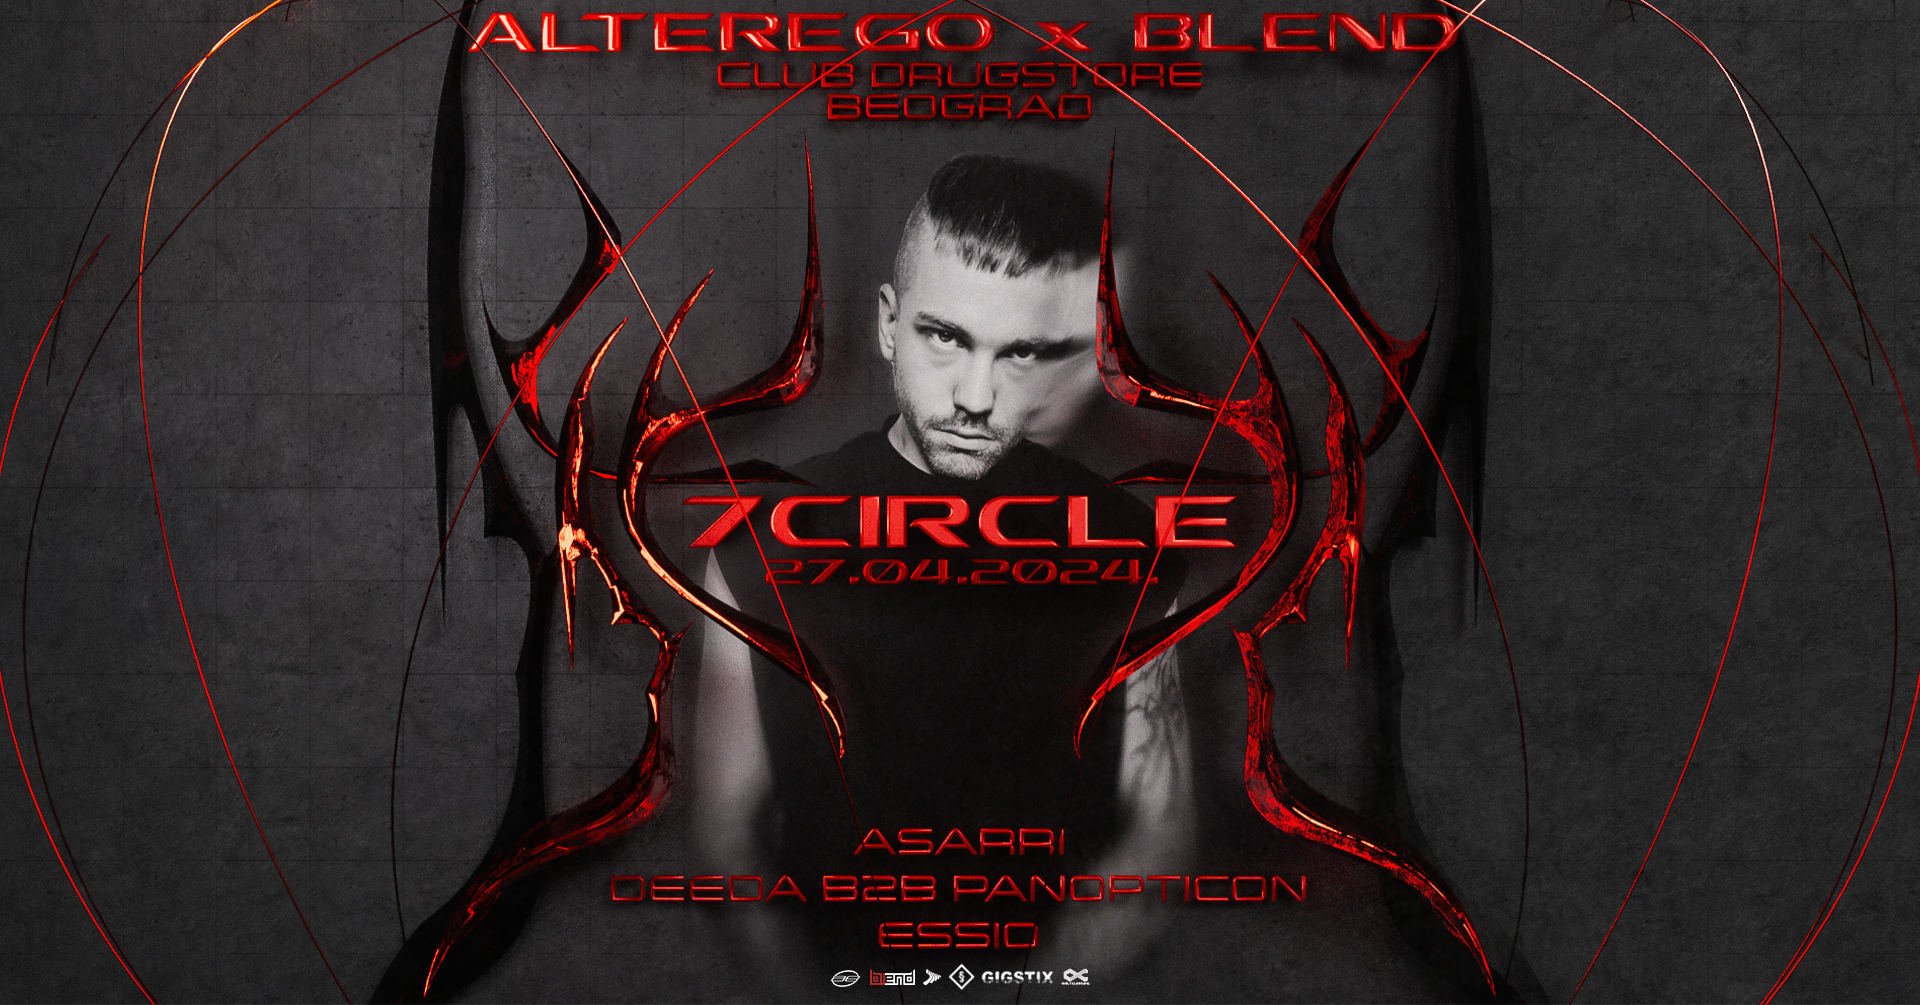 ALTEREGO x BLEND with 7CIRCLE - Página frontal